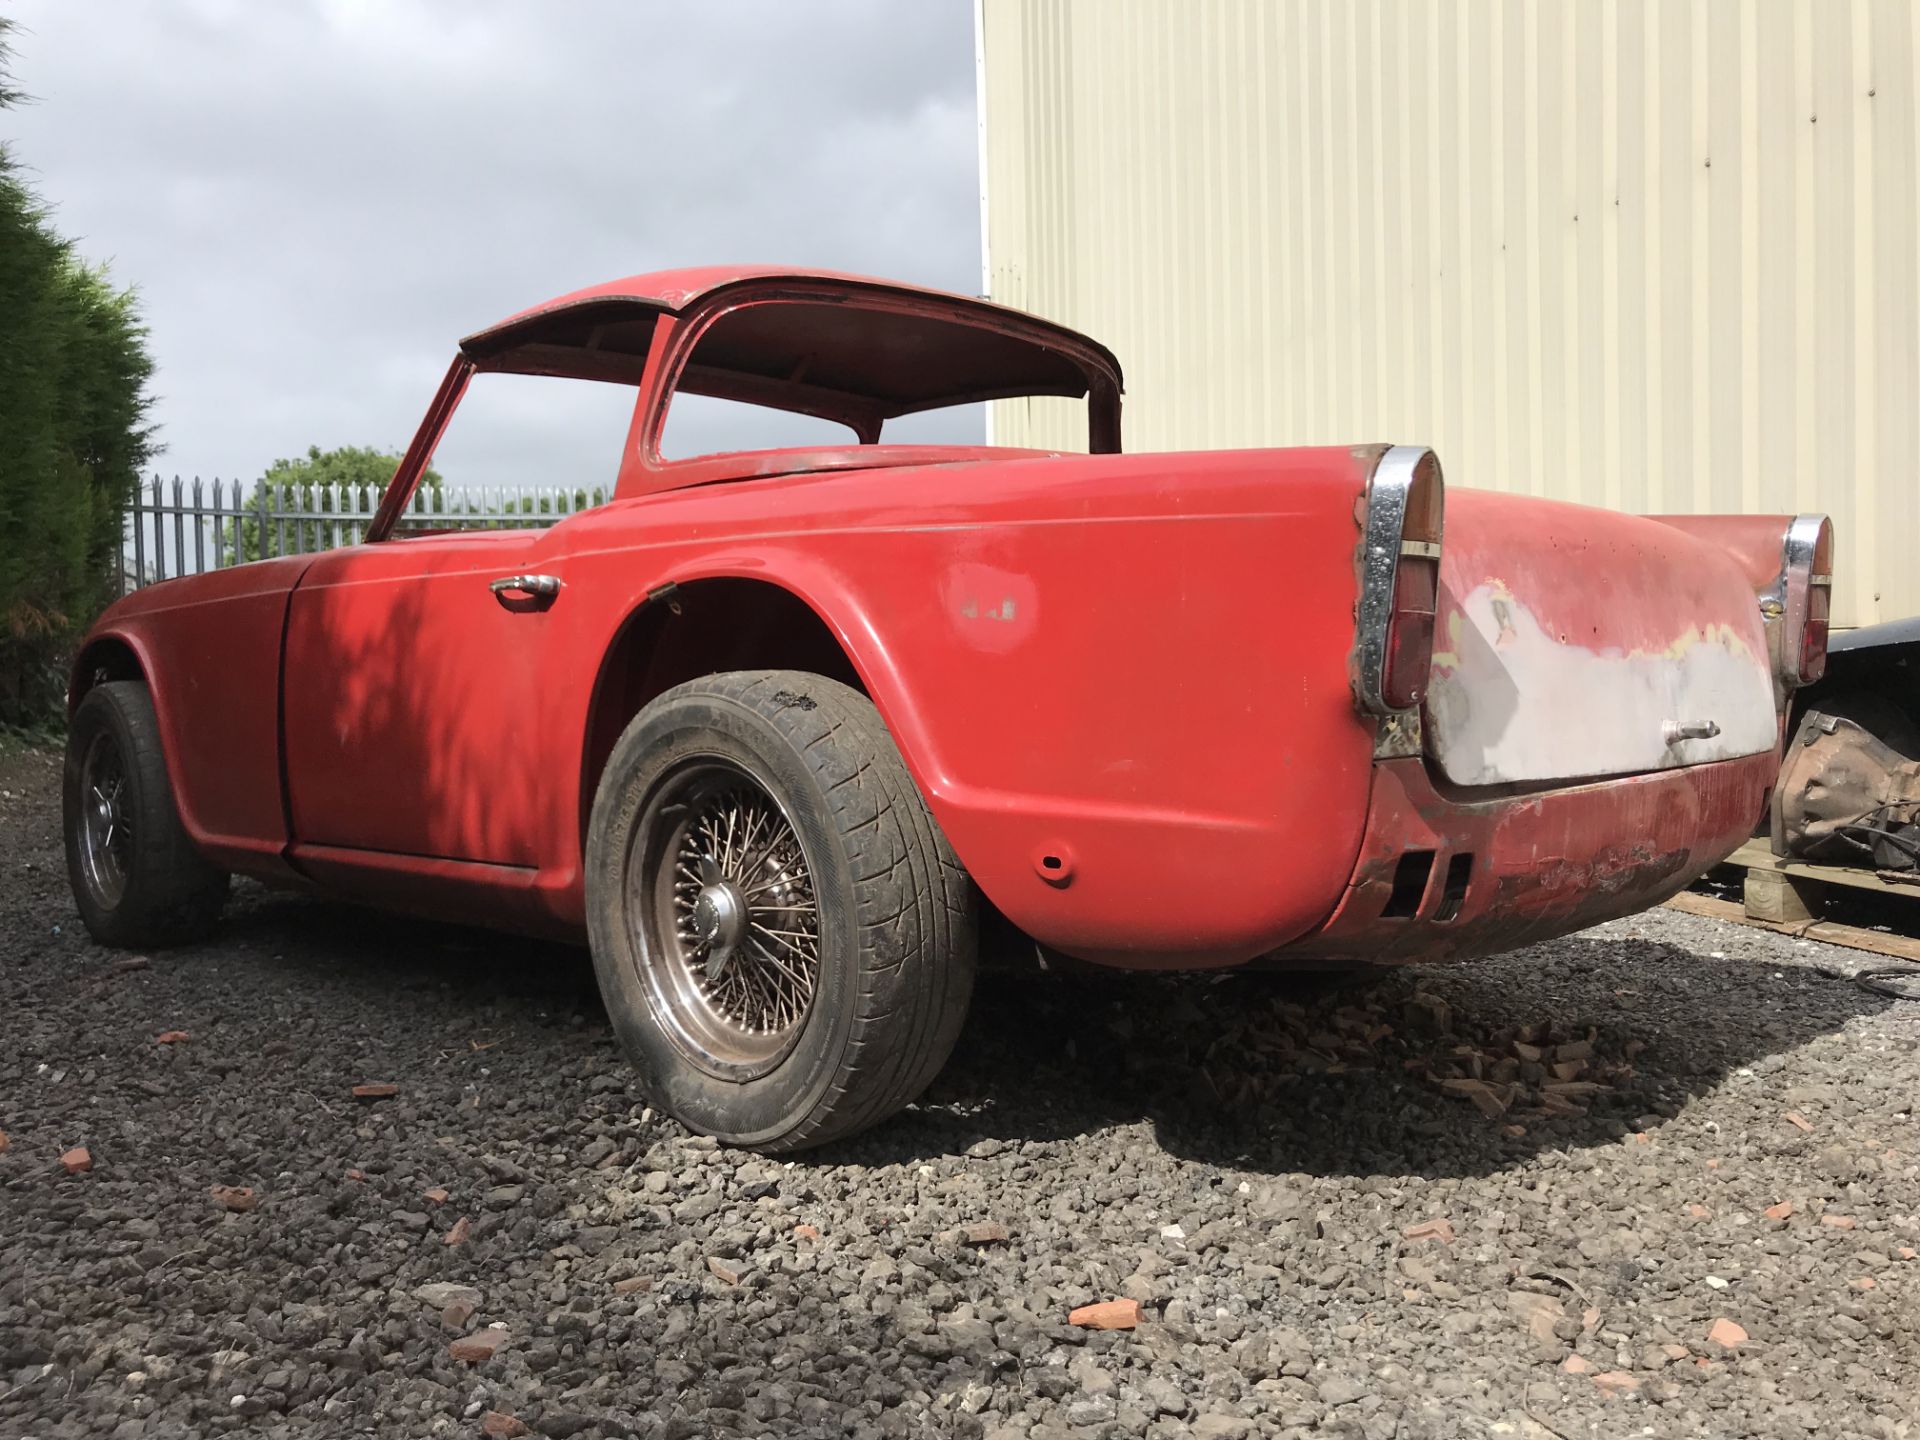 Triumph TR4 with Optional Hardtop - Image 46 of 64